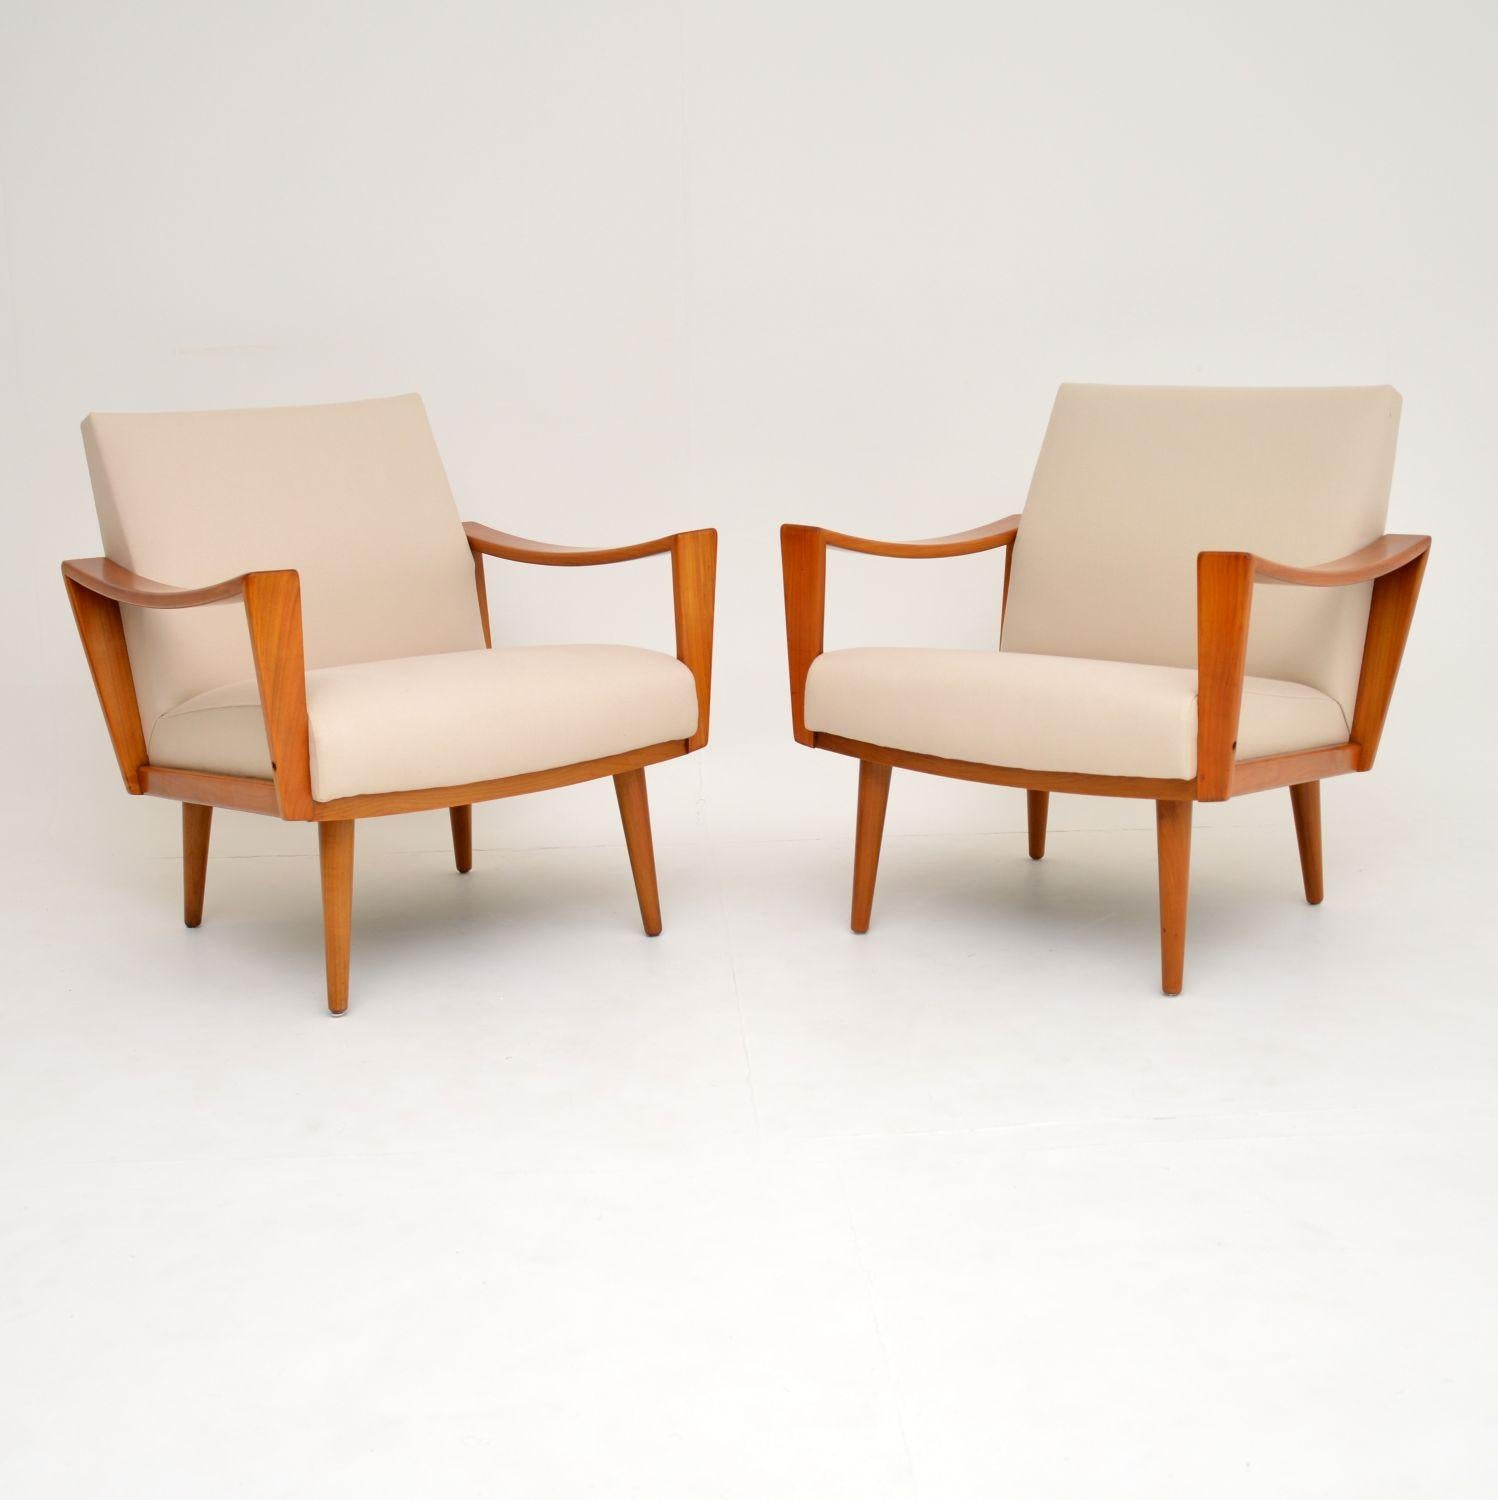 A stunning and comfortable pair of vintage armchairs, made in the Netherlands in the 1960’s. They are excellent quality, and have a super stylish design.

The frames are solid cherry wood, we have had them stripped and re-polished to perfection.